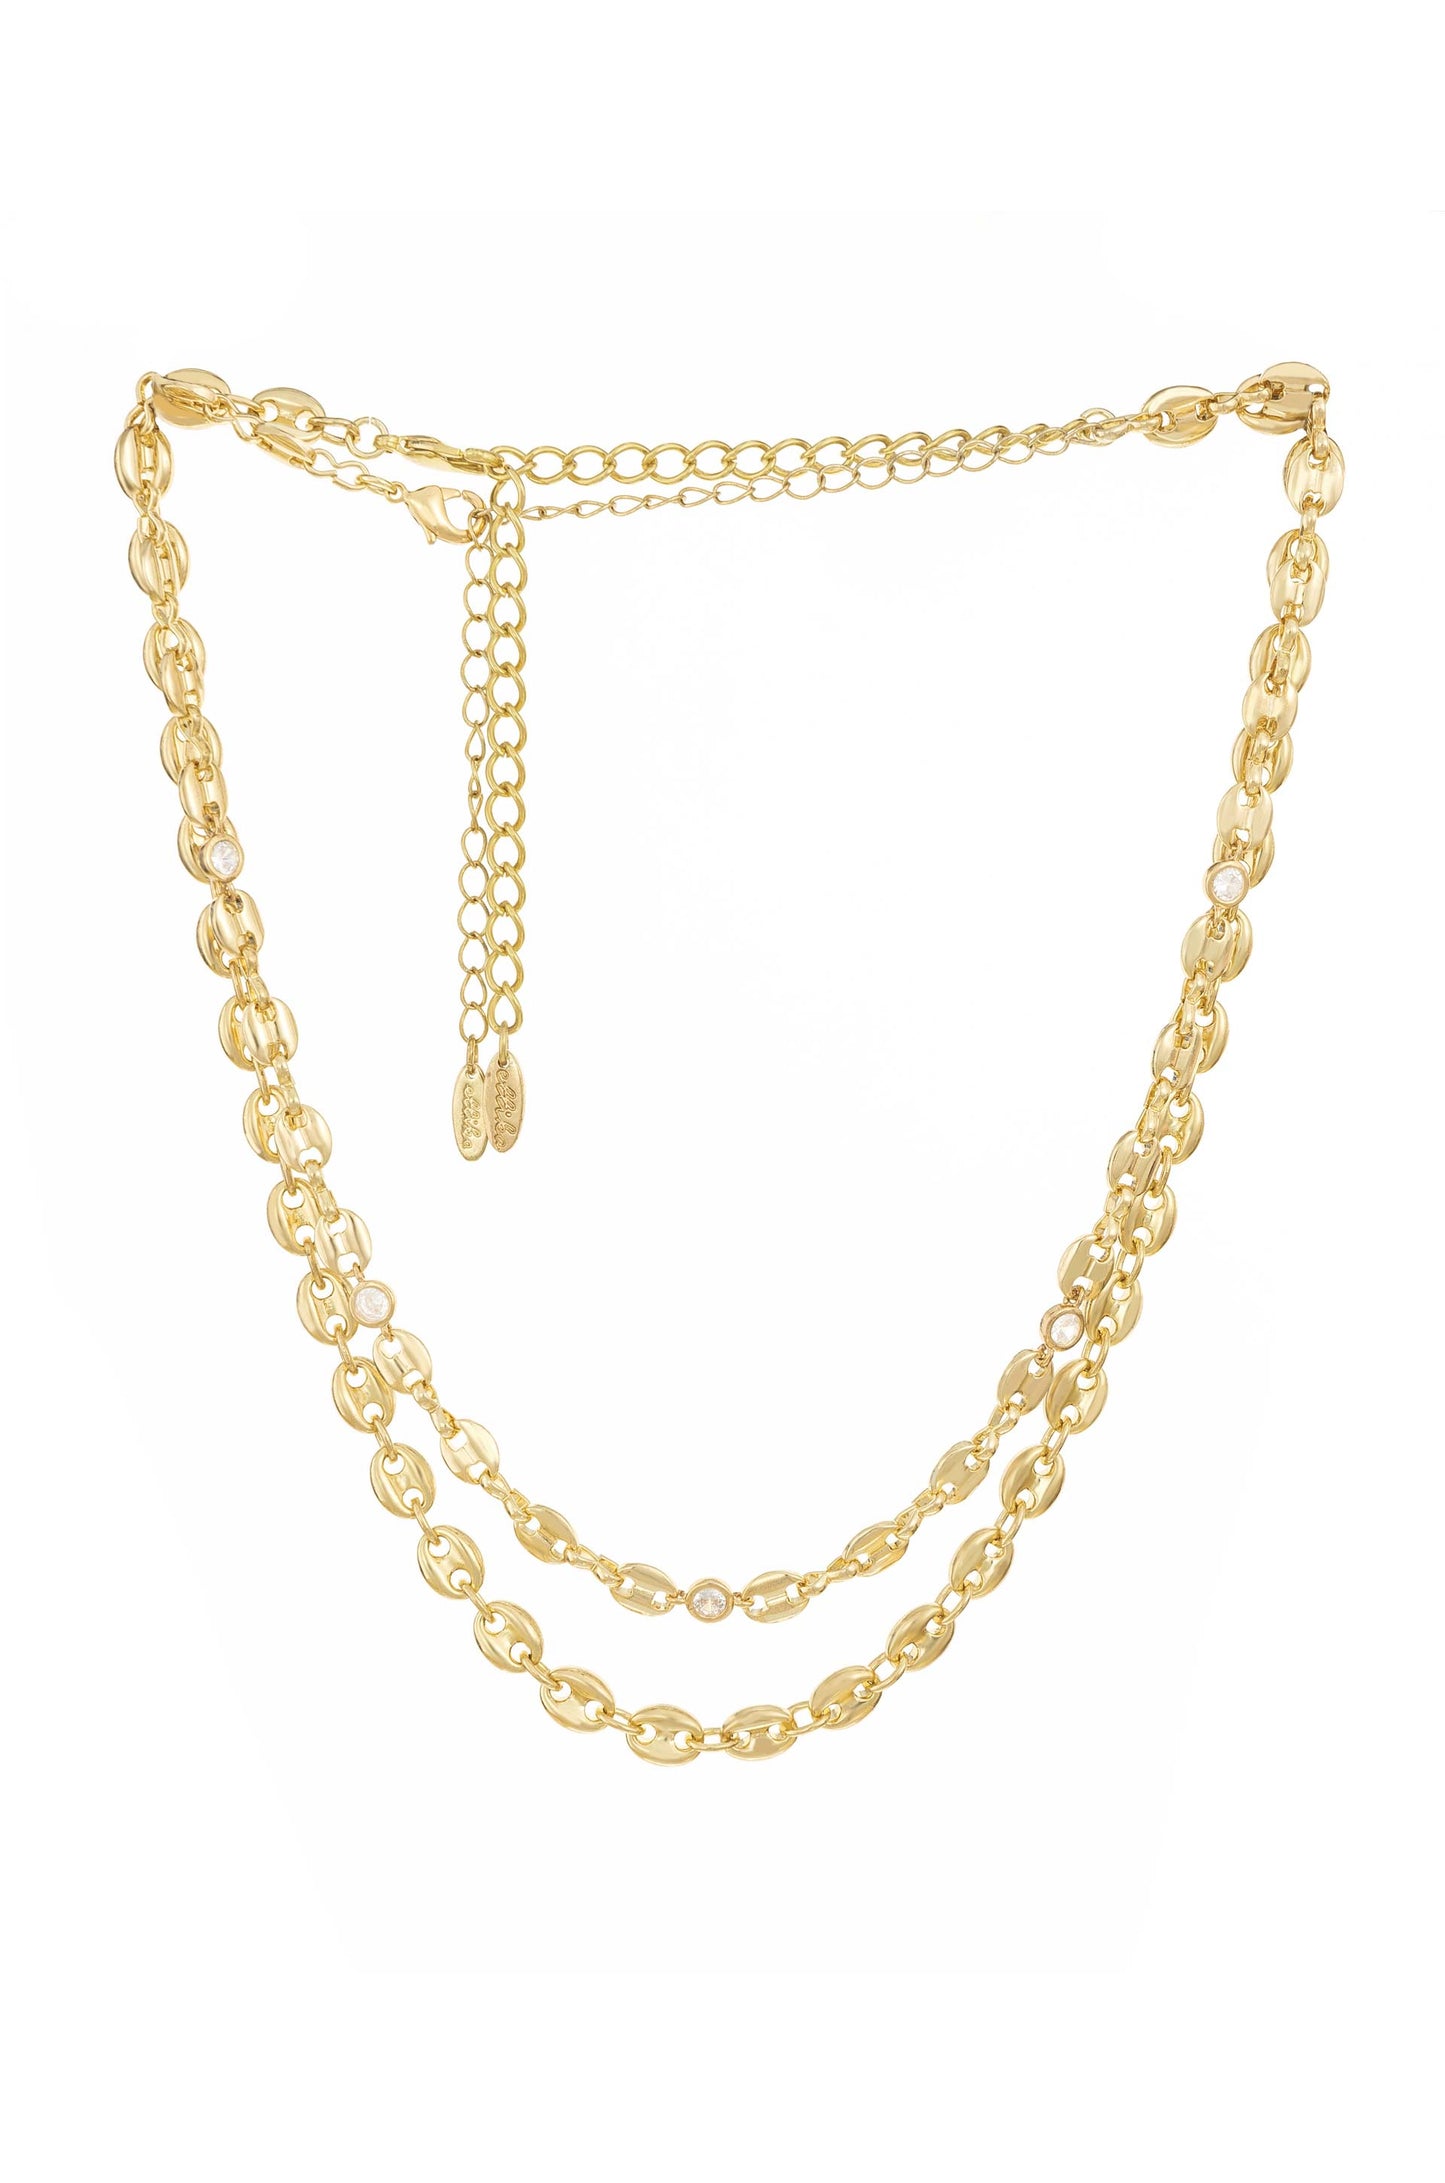 West Coast Sunset 18k Gold Plated Double Chain Necklace on white background 2